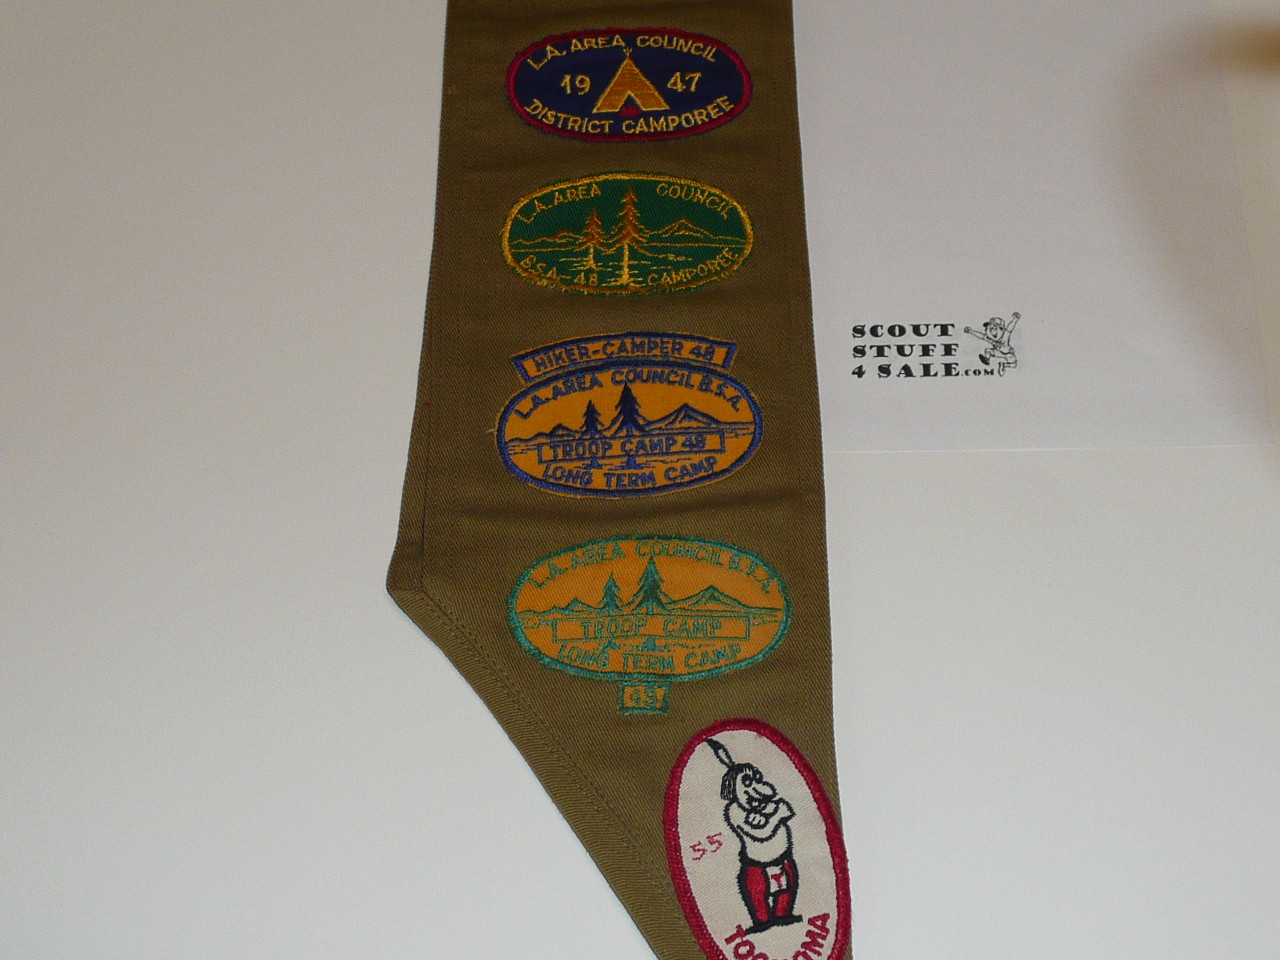 1940's Boy Scout Merit Badge Sash with 16 crimped merit badges, Sateen LAAC Camp Patches, Rank/Position Patches and a Los Angeles Kh/Red Strip, 1950 NJ LAAC JSP and more, #FB28